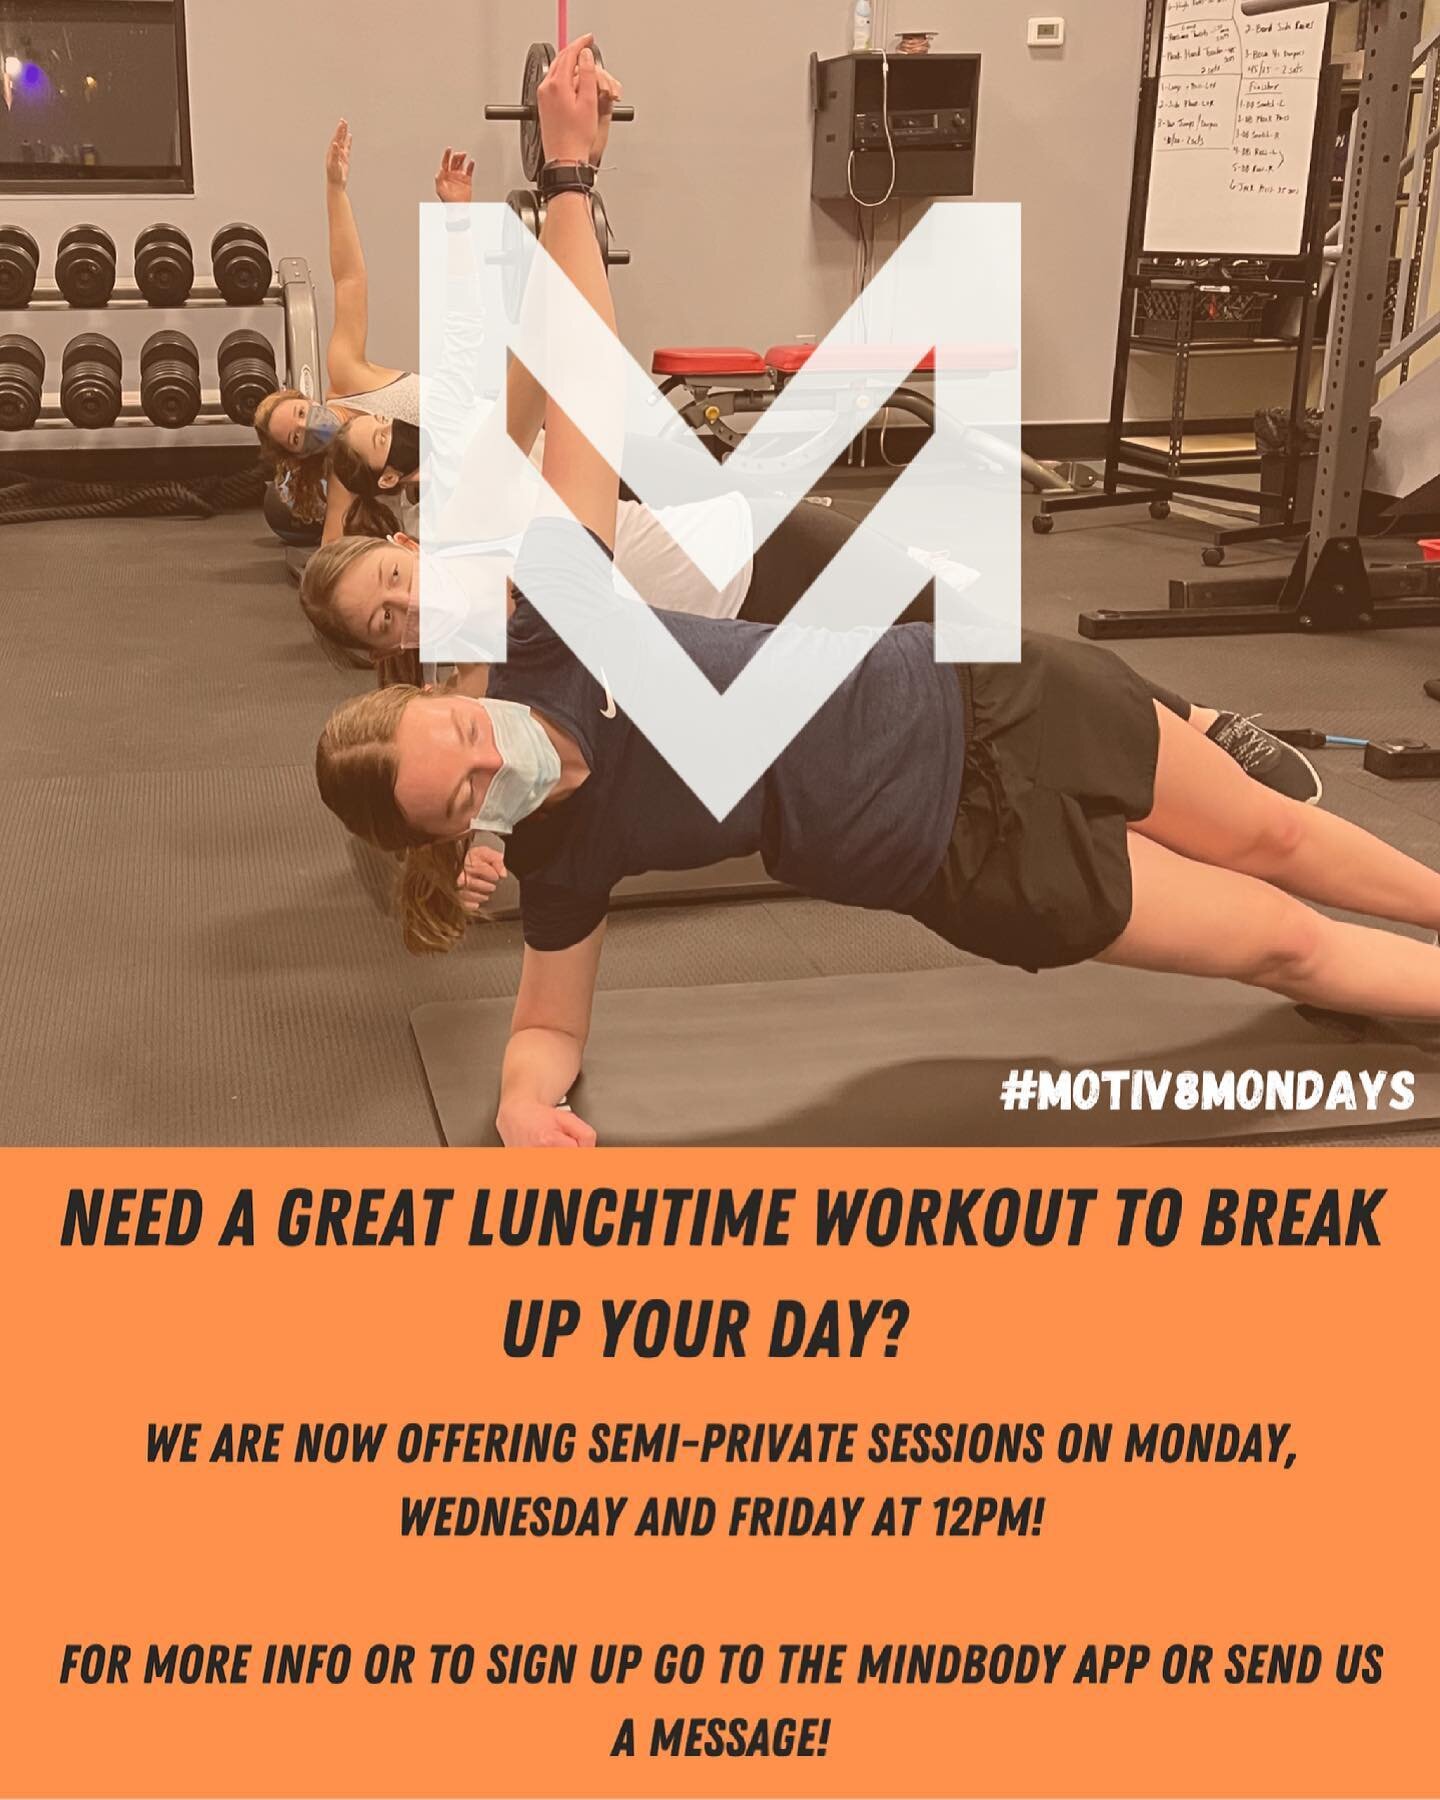 Join us at lunchtime for a semi-private session to help break up your work day! Starting this Monday (TODAY) we will be offering these sessions on Monday, Wednesday and Friday, WEEKLY at 12pm for 45 minutes! 

These semi-private sessions will be limi